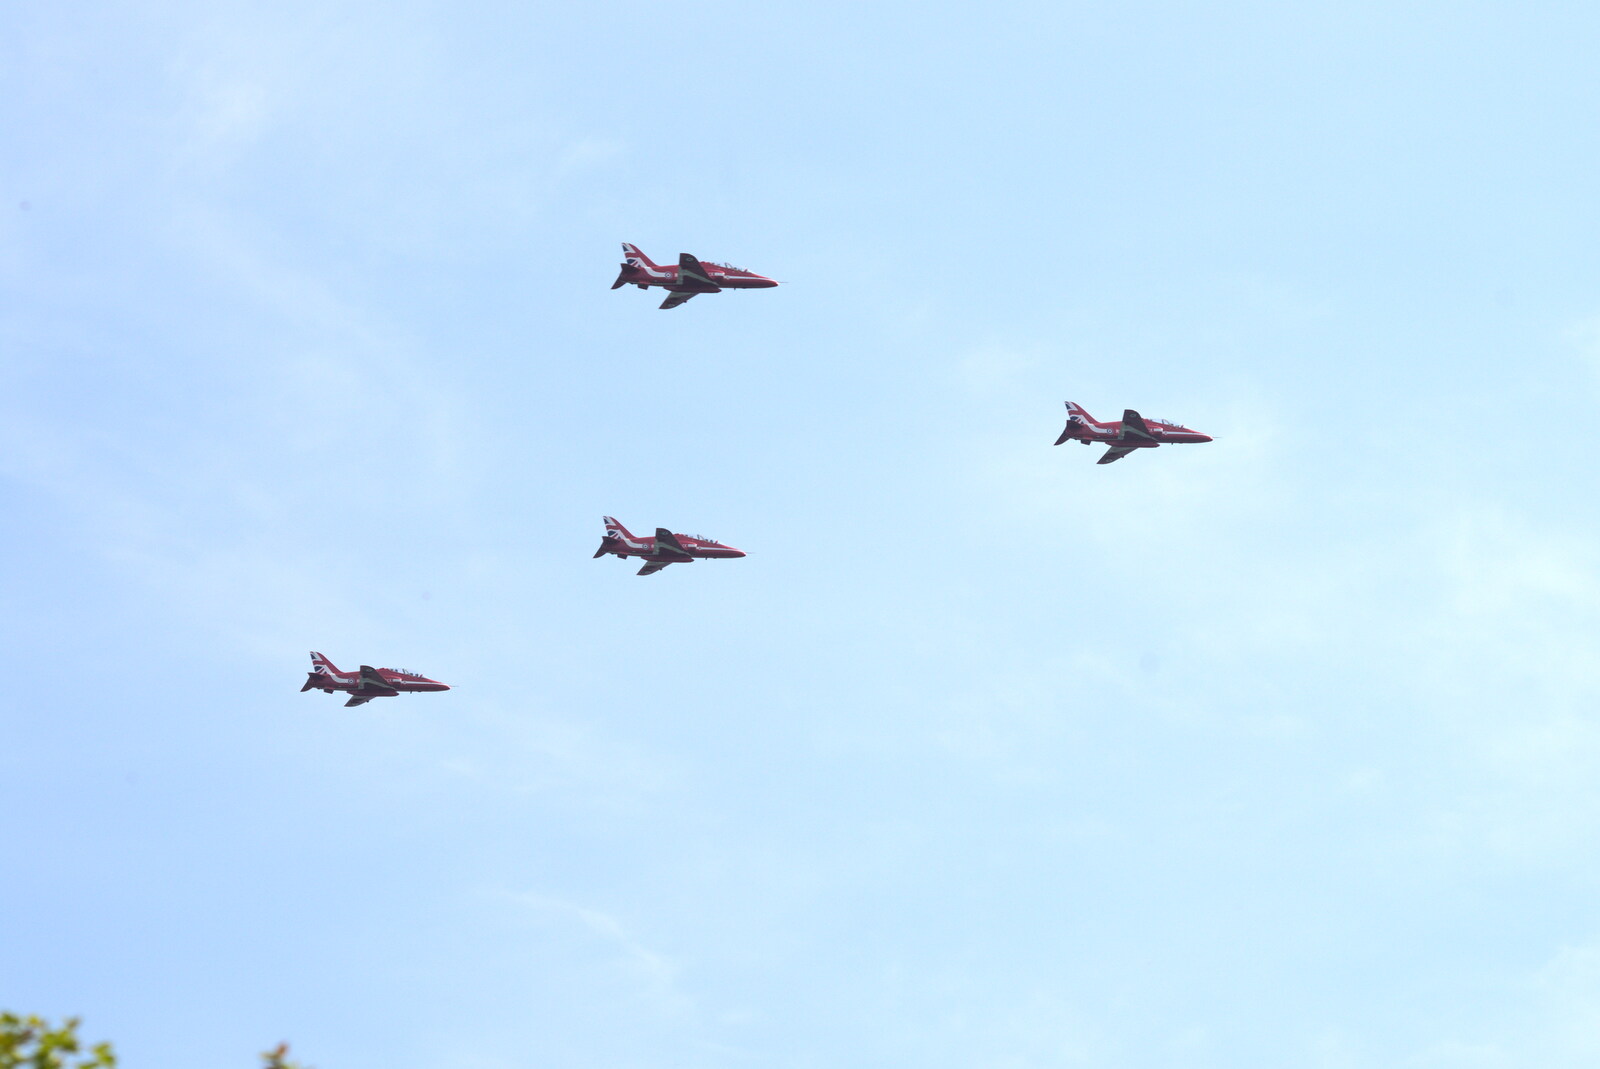 The remaining four Hawks fly over from Pin-hole Cameras and a Red Arrows Flypast, Brome, Suffolk - 8th May 2020